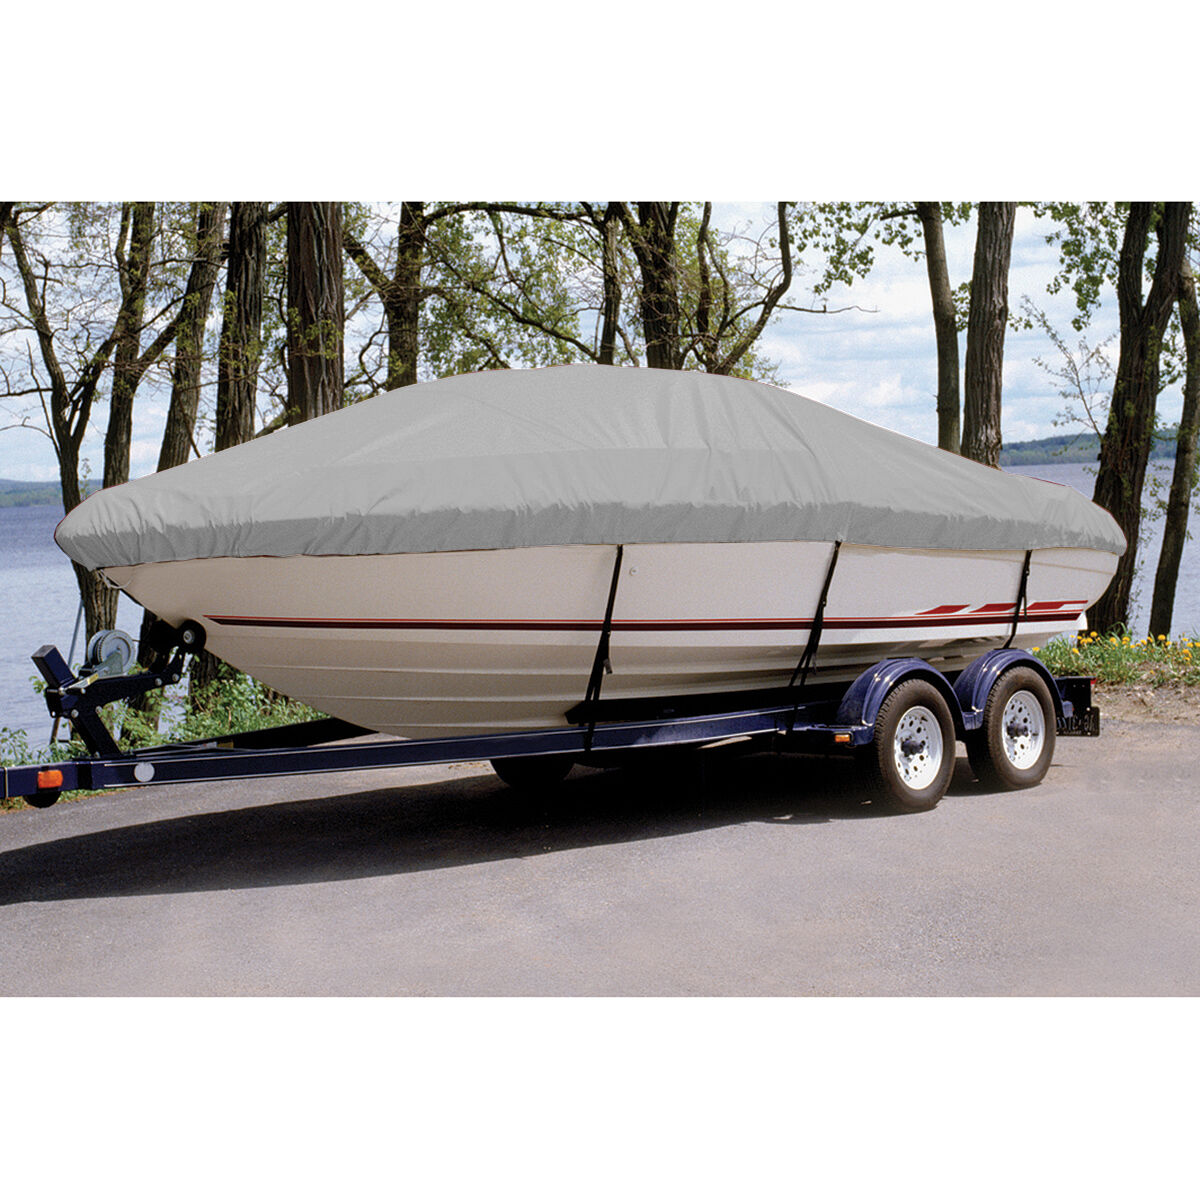 Taylor Trailerite Ultima Cover for 09-12 Lund 1625 Rebel XL Sport PTM O/B in Grey